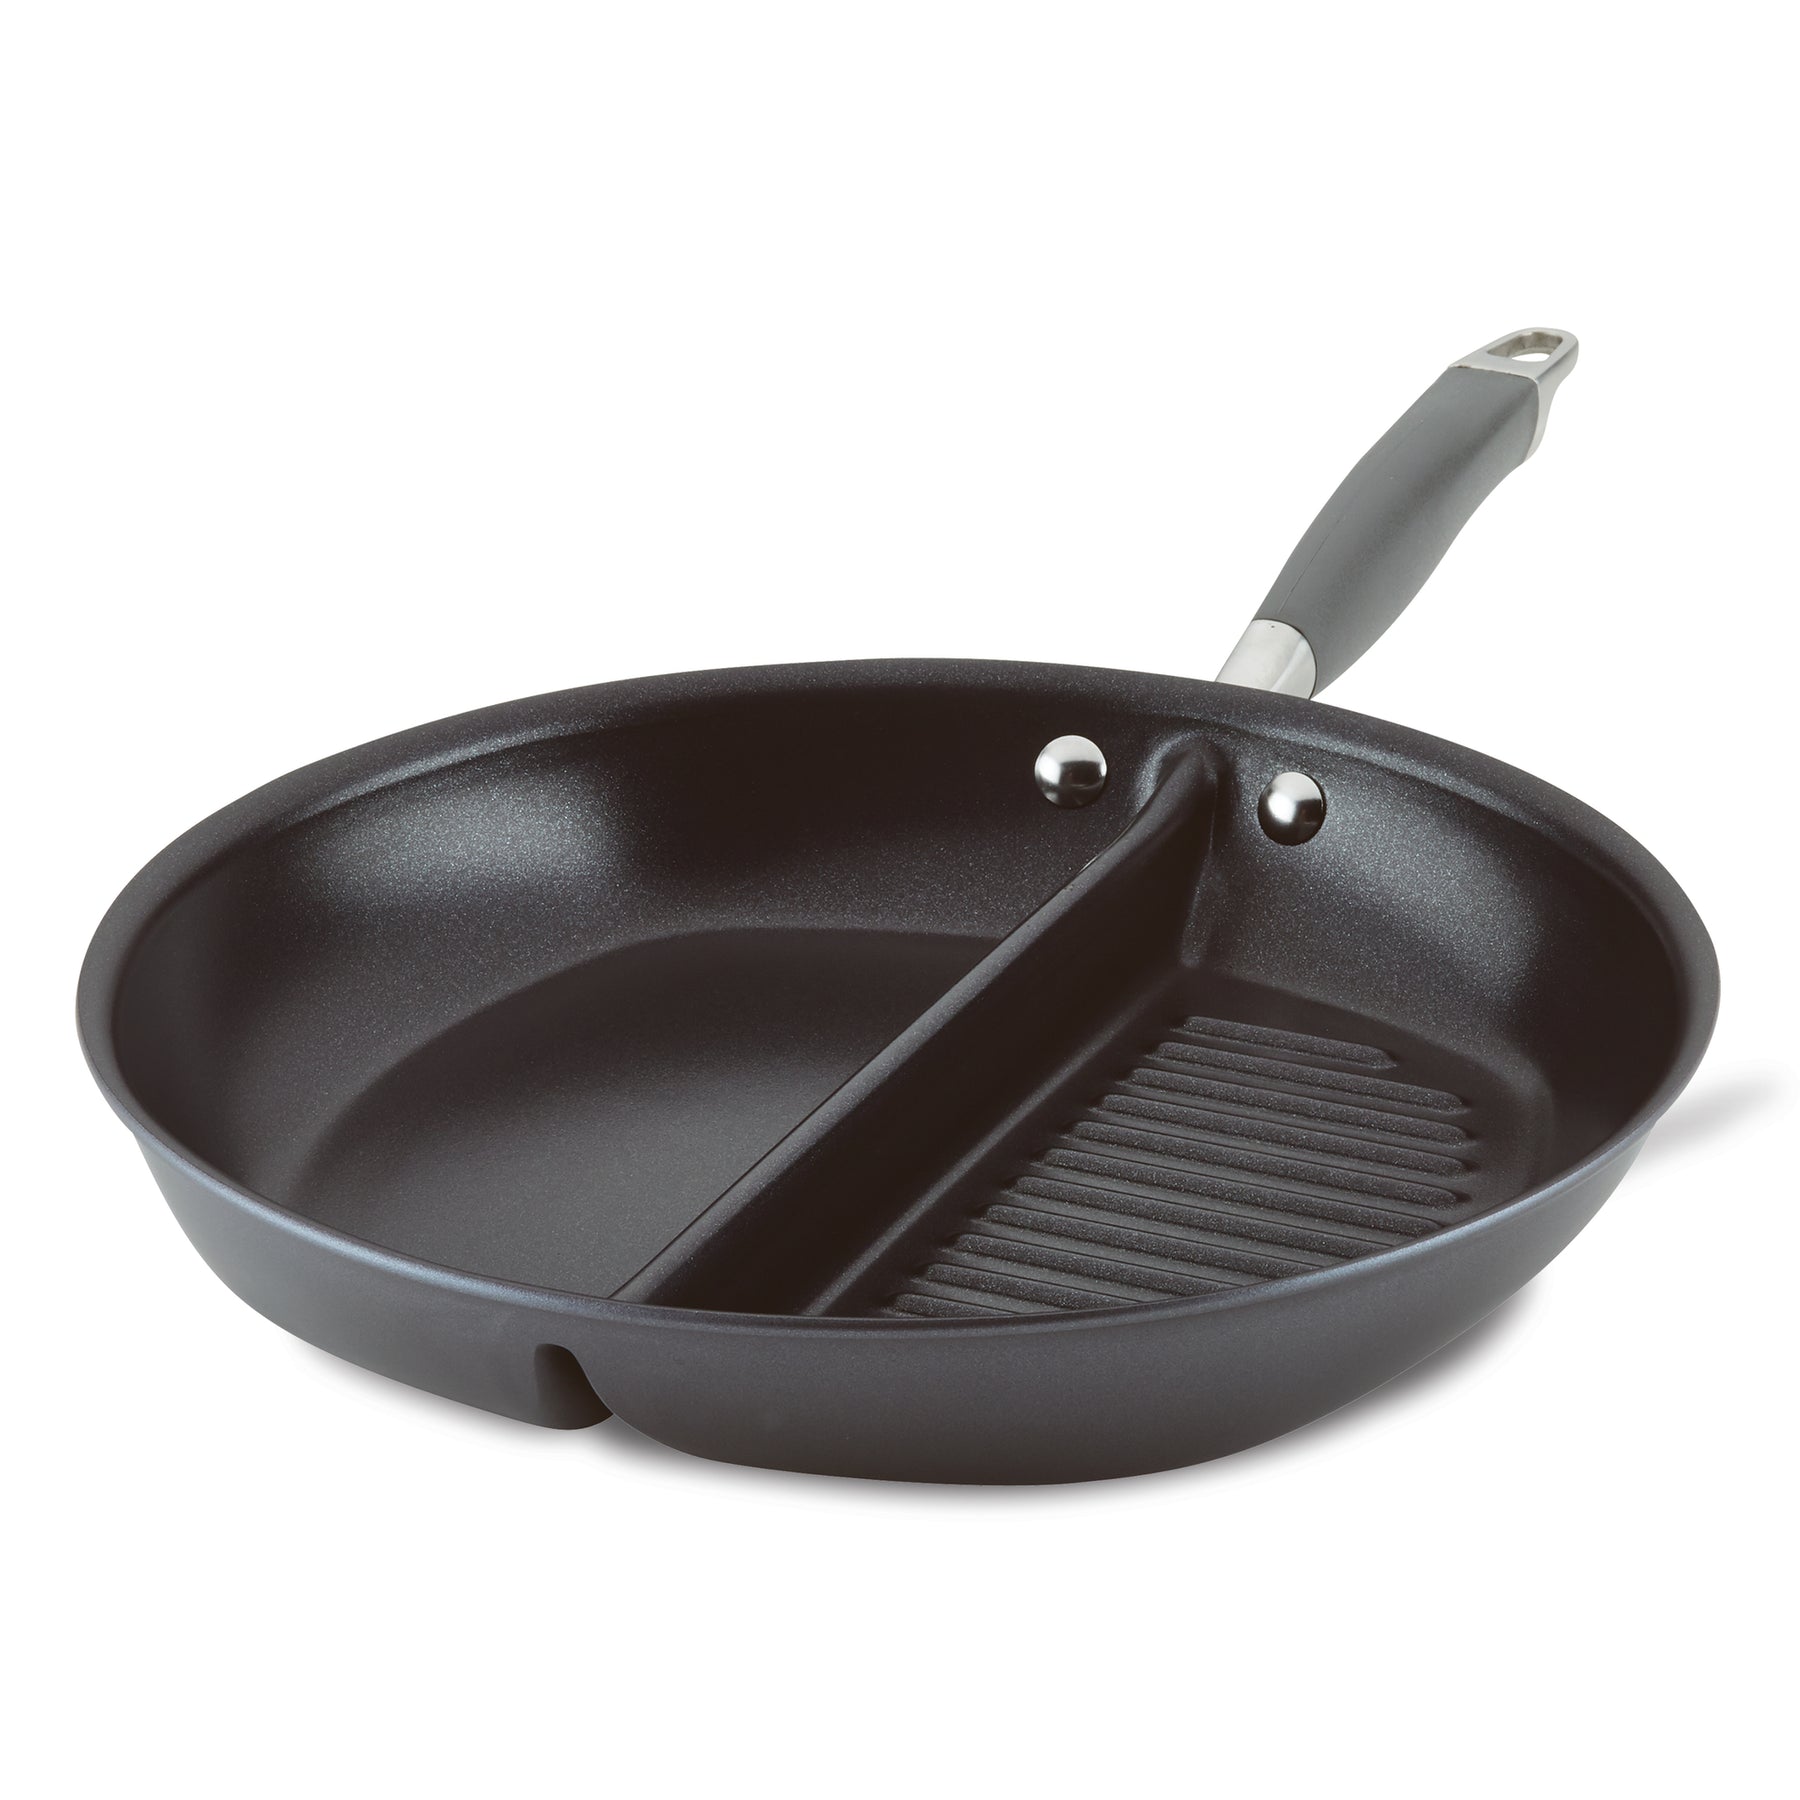  Divided Pan for Cooking, Frying Grill Pan 3 In 1 Pan